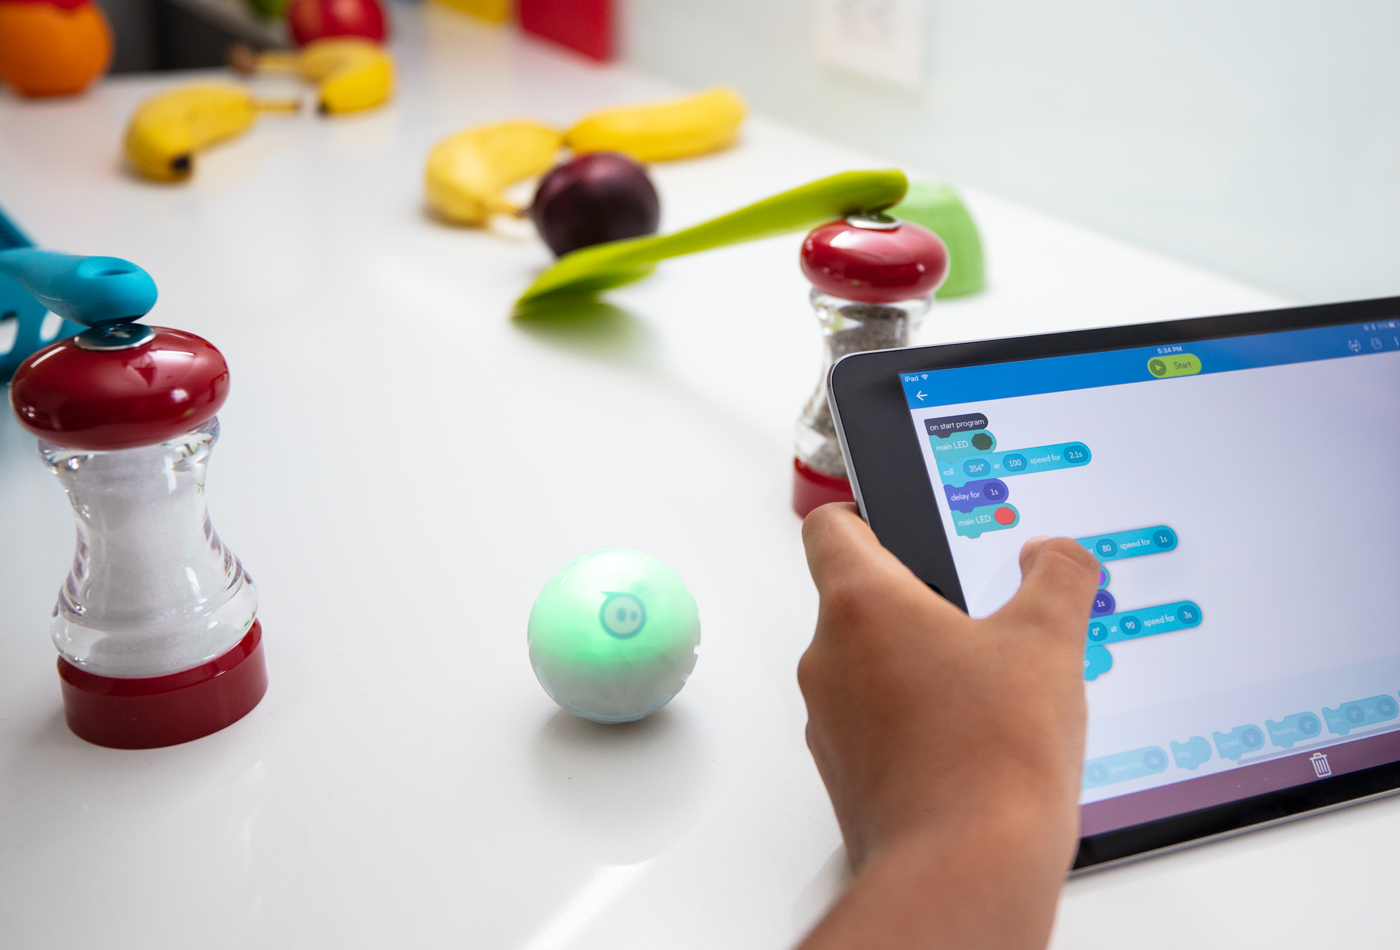 Sphero BOLT Coding Robot, Privacy & security guide